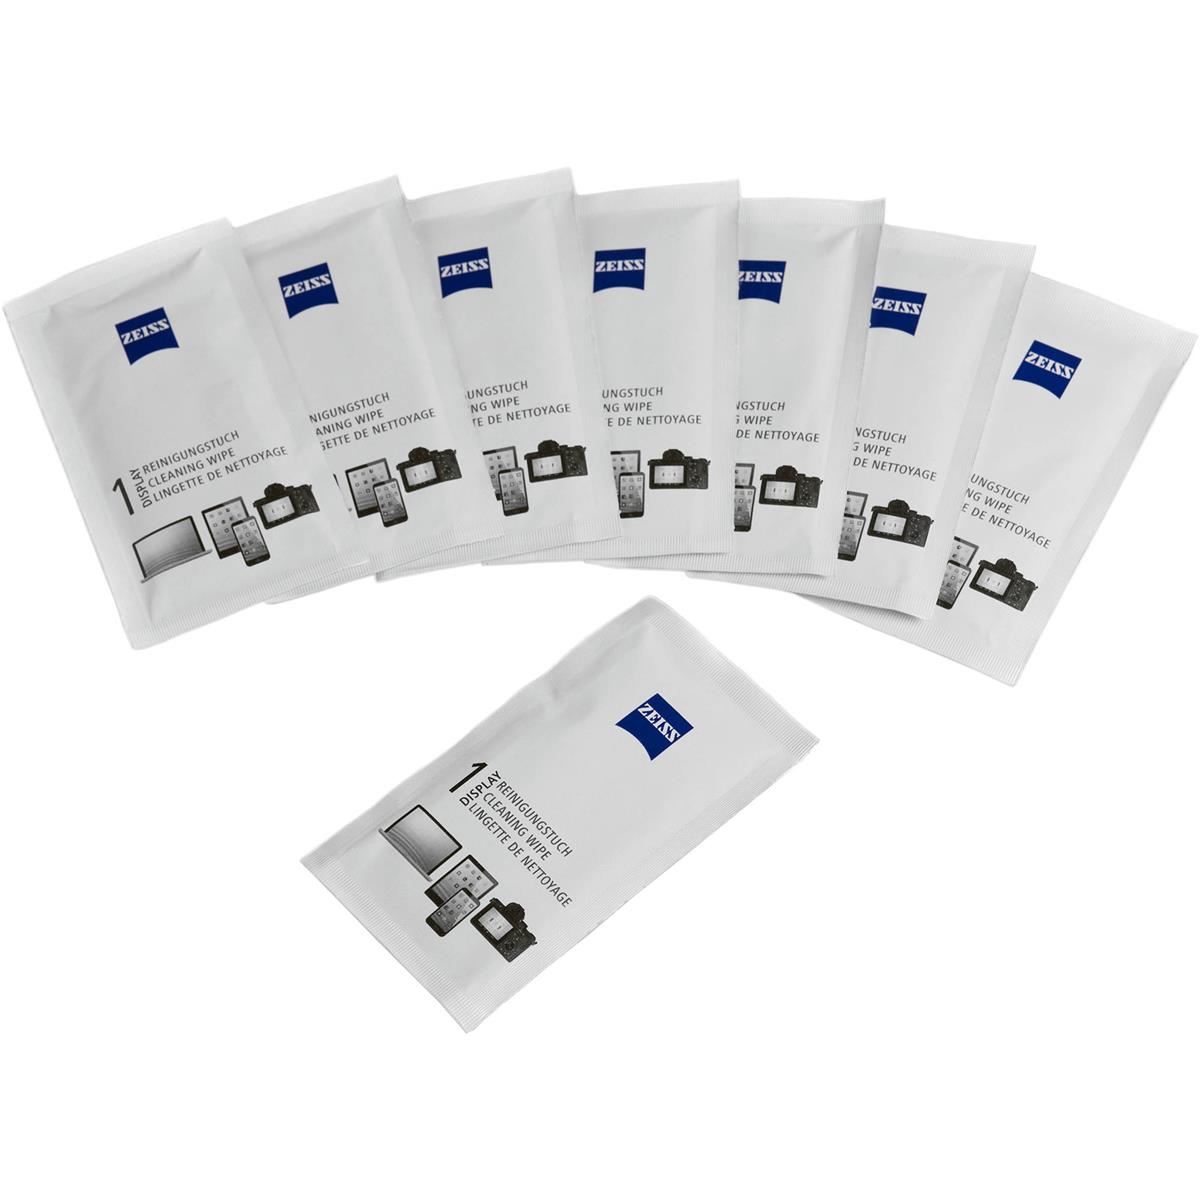 

Zeiss Display Wipes, 30 Pack